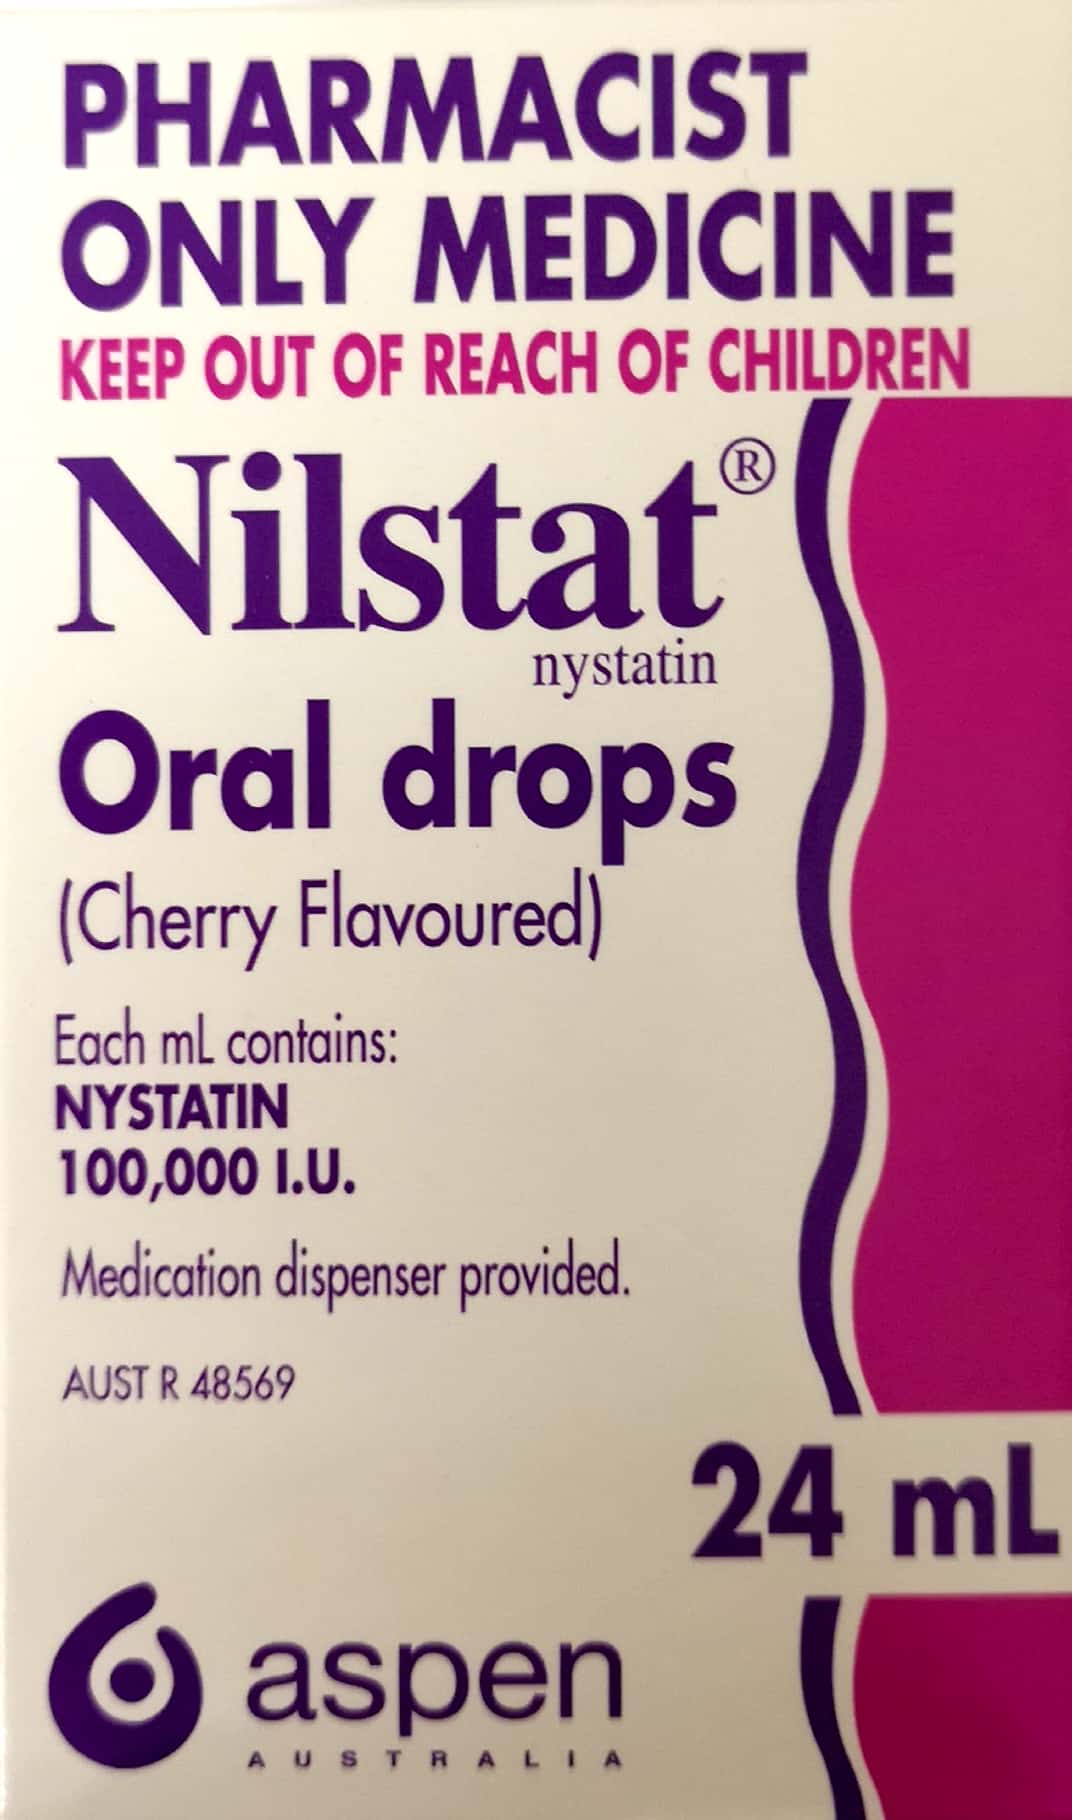 Nilstat Oral Drops (Cherry Flavoured) 24 mL -Pharmacist Only Medicine